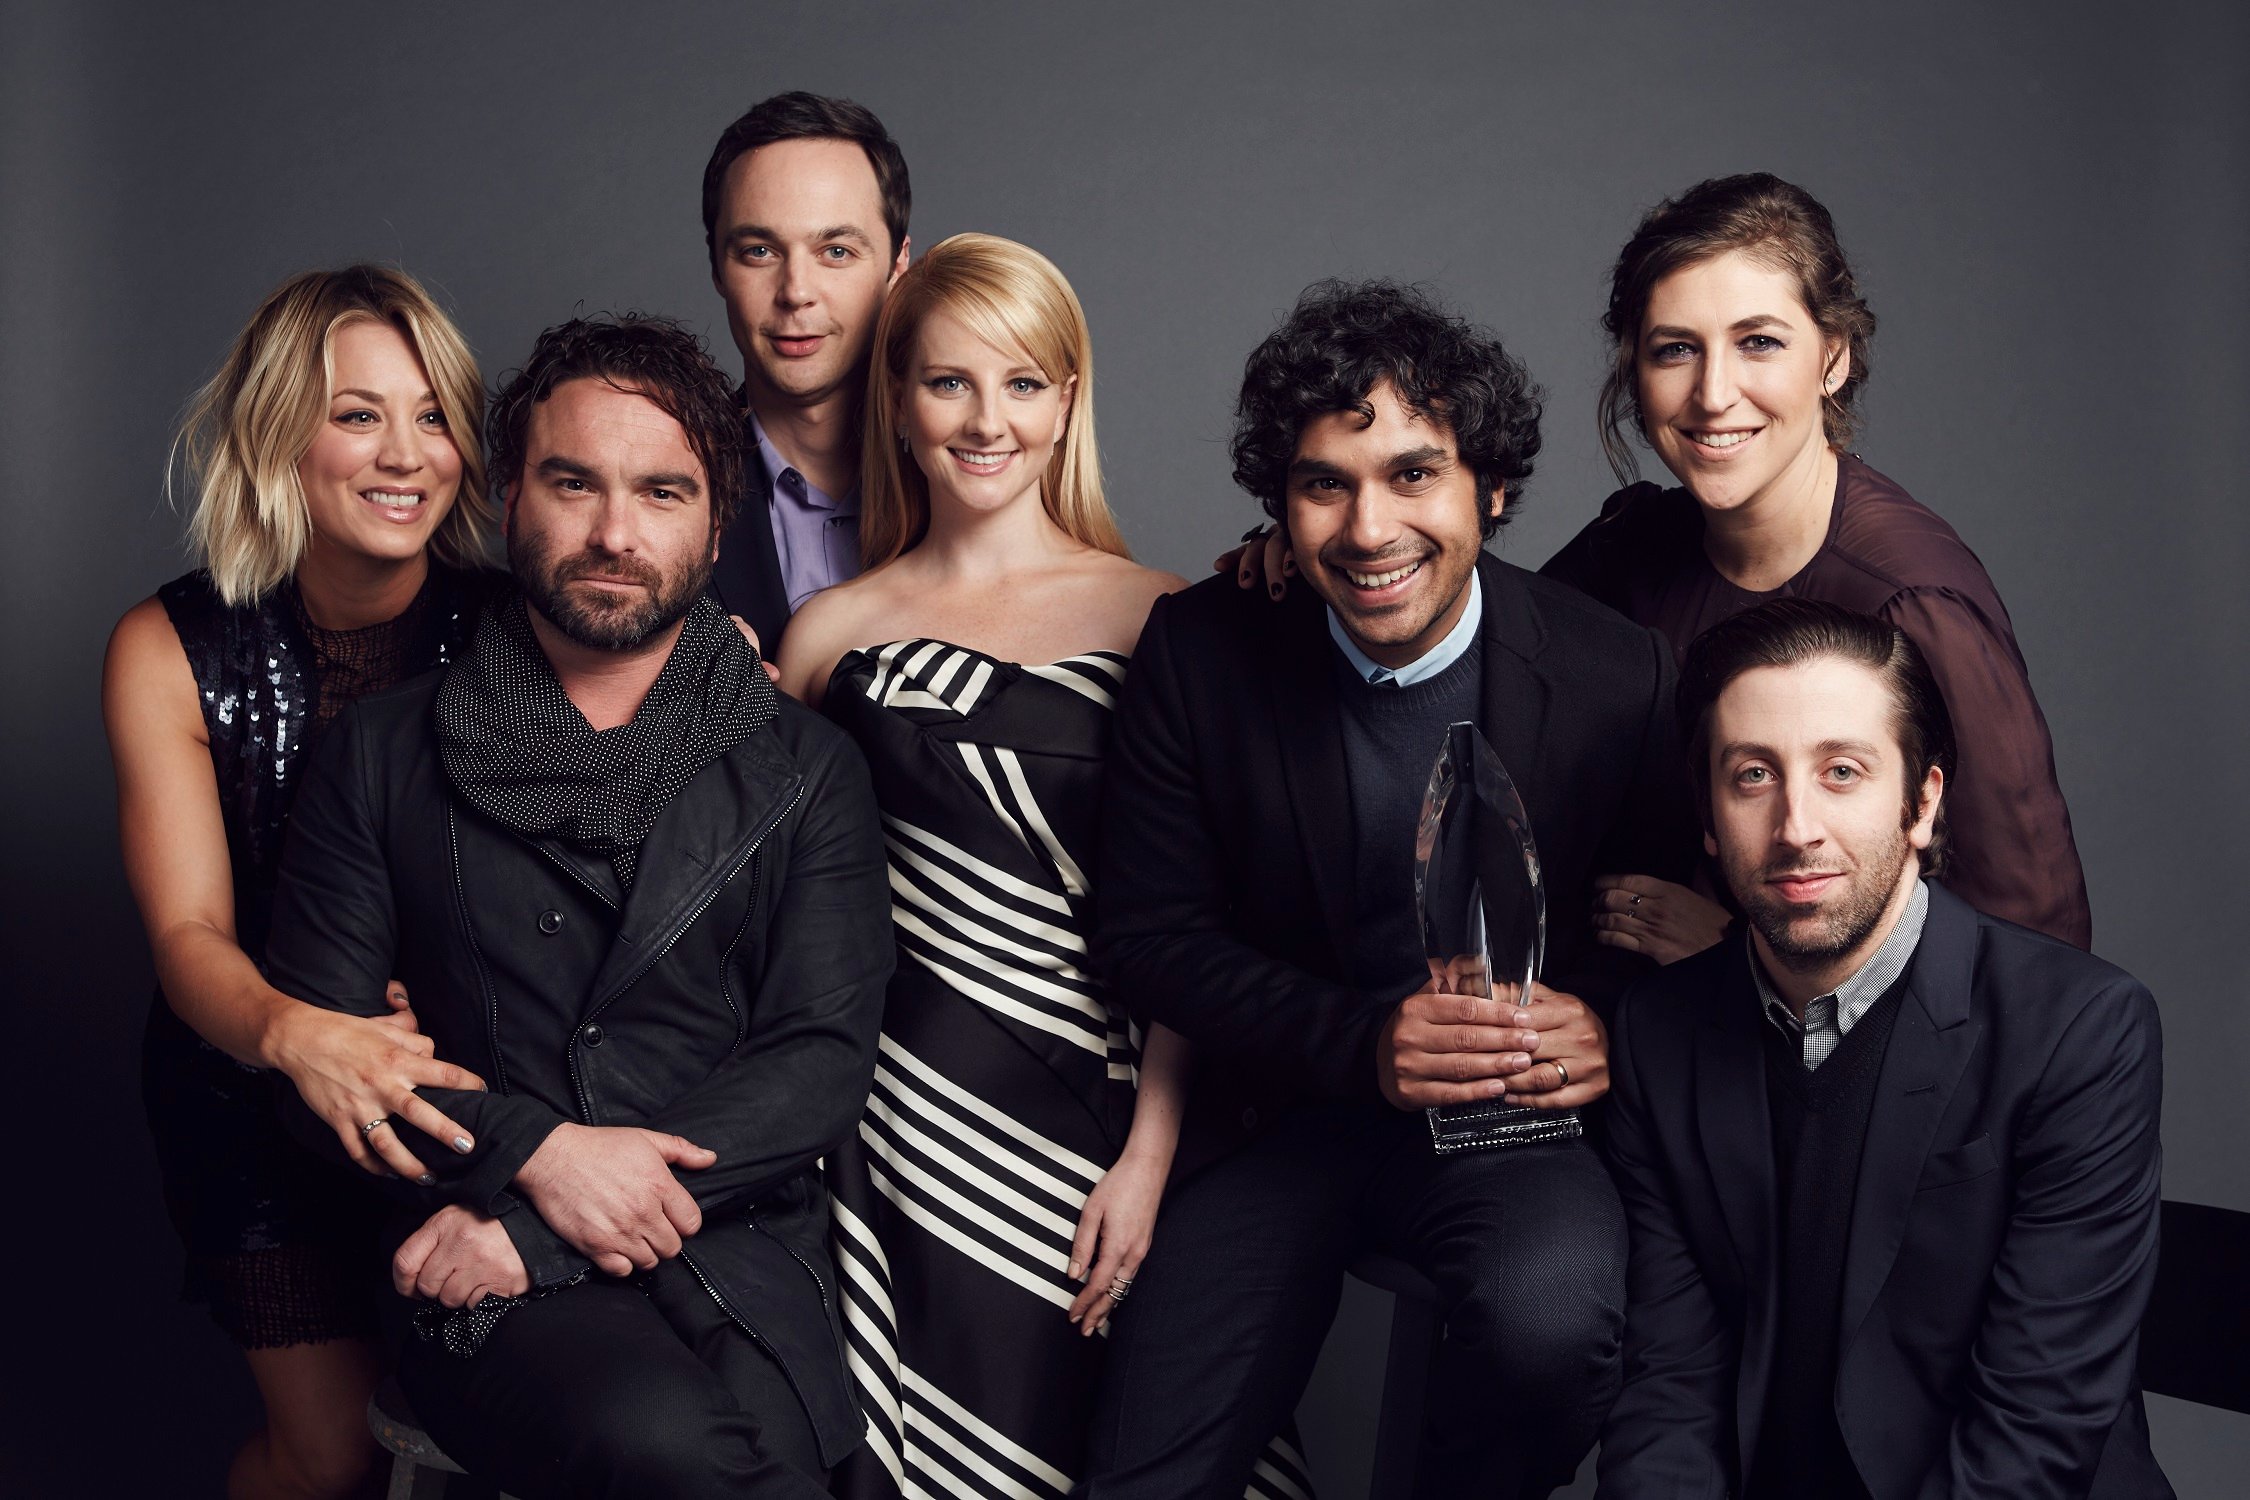 Kaley Cuoco, Johnny Galecki, Jim Parsons, Melissa Rauch, Kunal Nayyapose, Mayim Bialik and Simon Helberg pose for a portrait at the 2016 People's Choice Awards at the Microsoft Theater